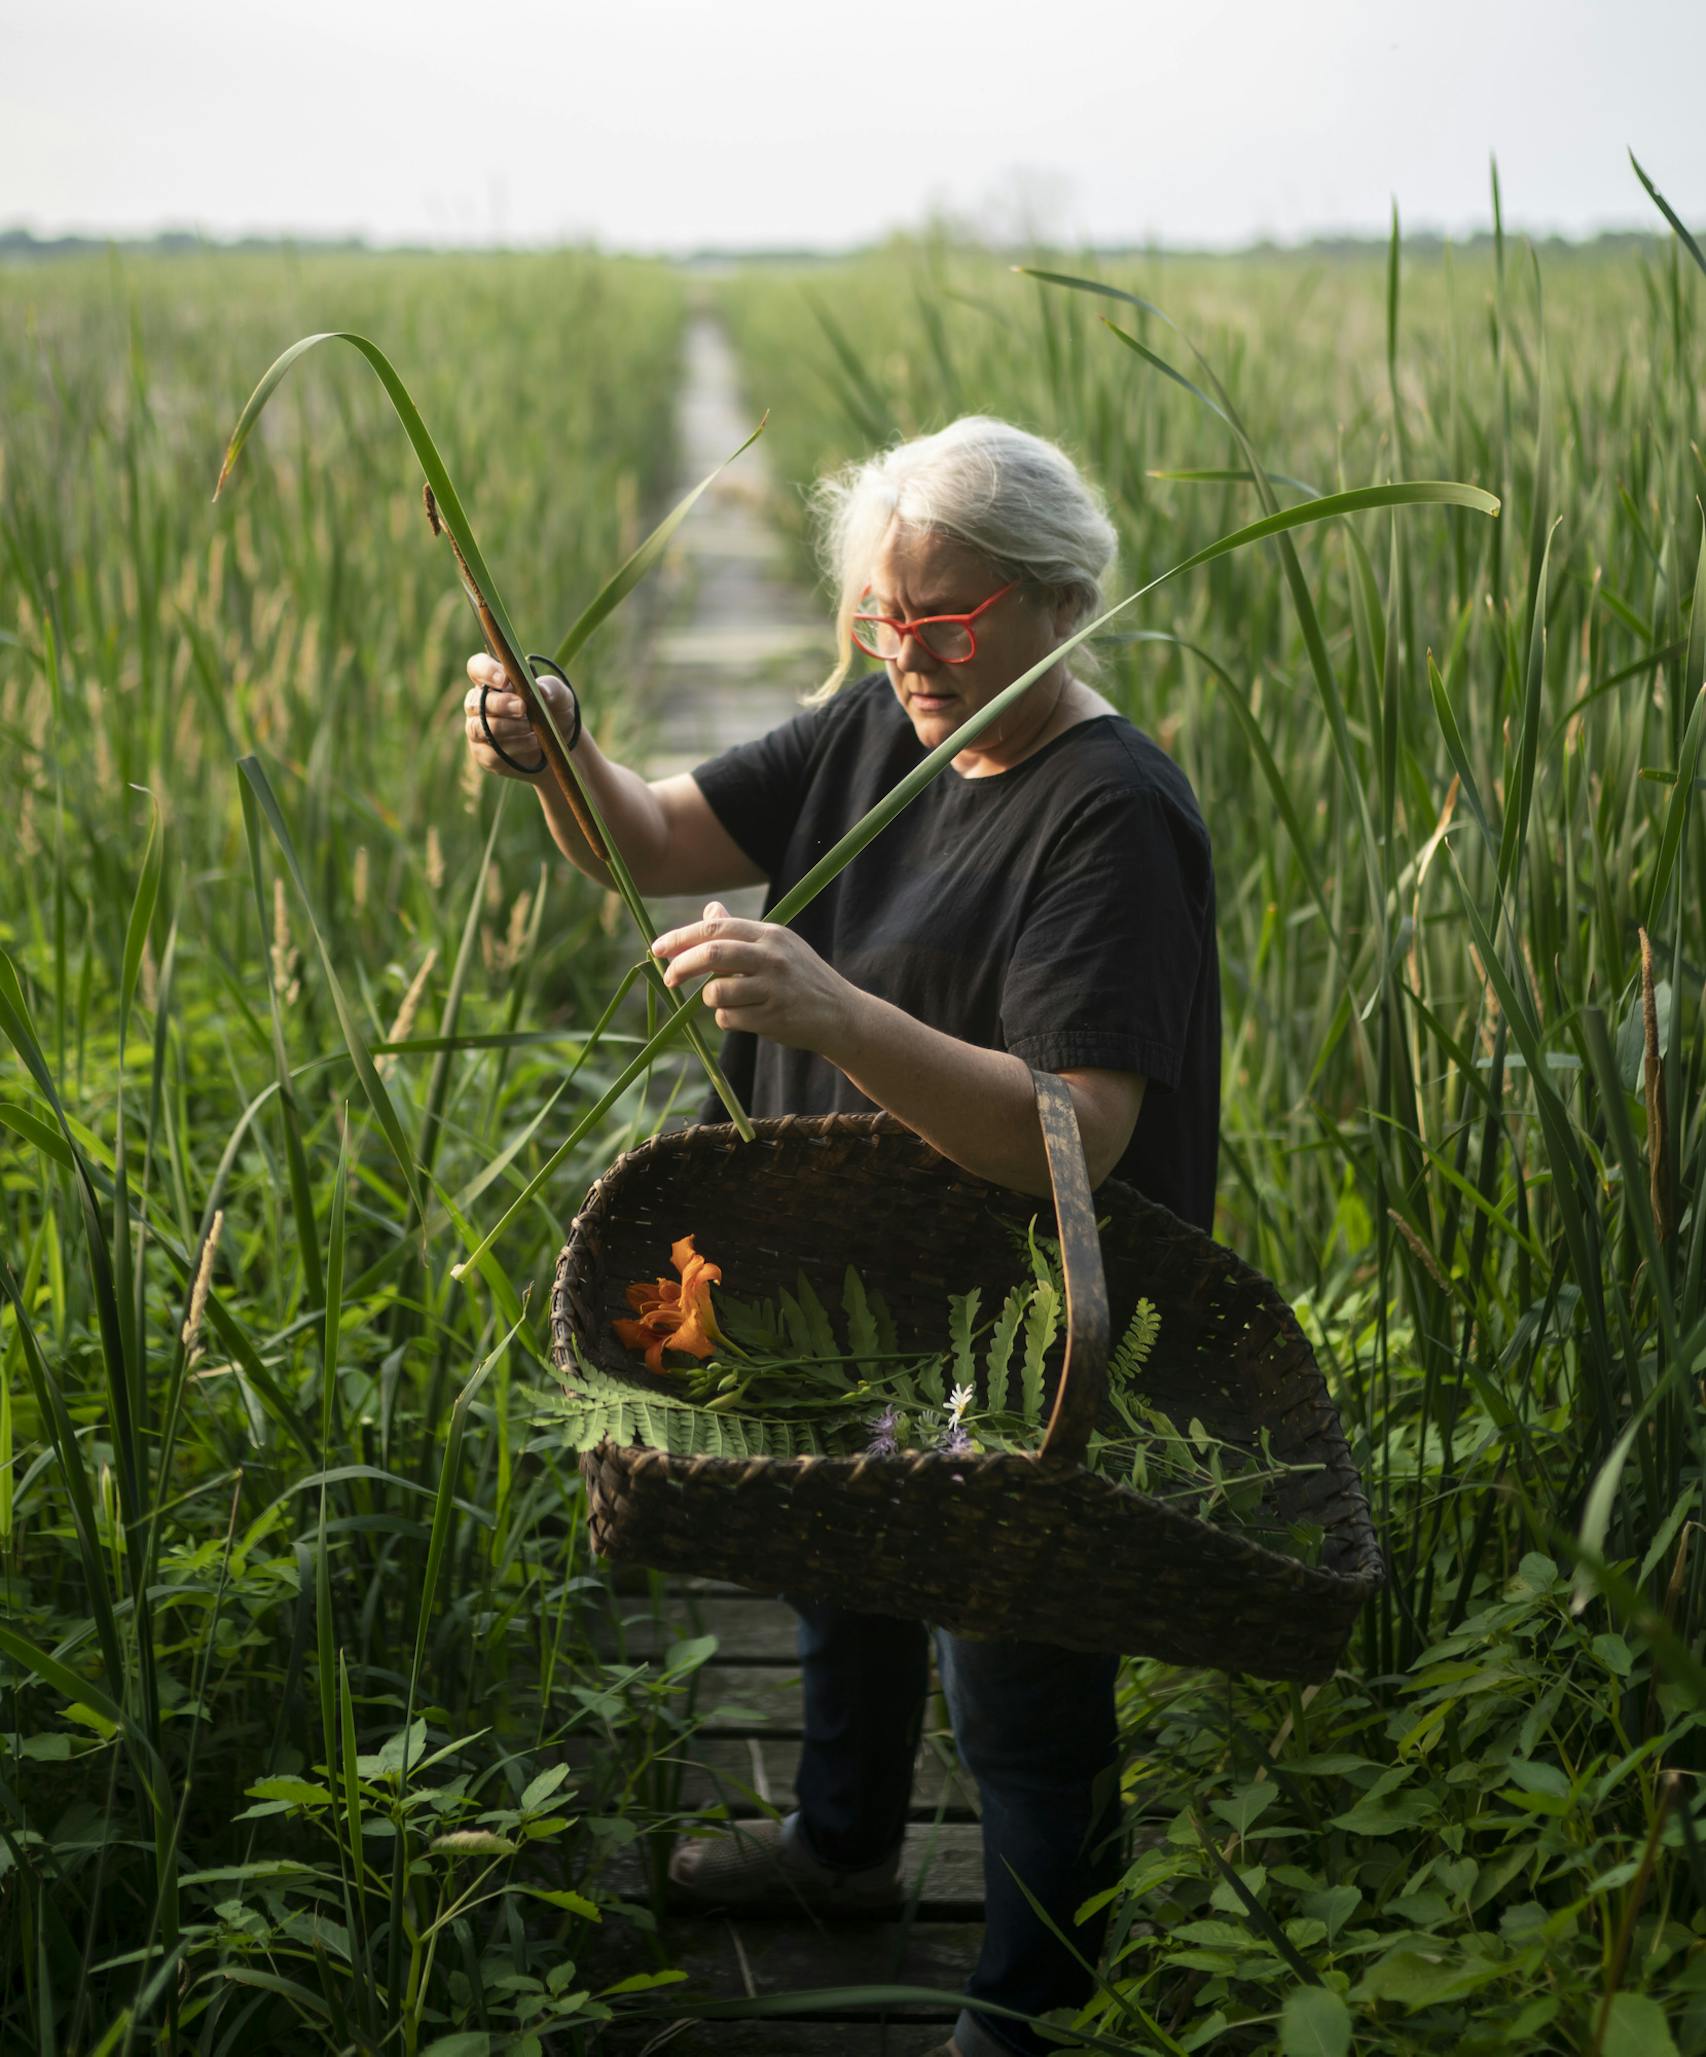 For 10 years, Mary Jo Hoffman has been finding the beauty in nature and photographing it.